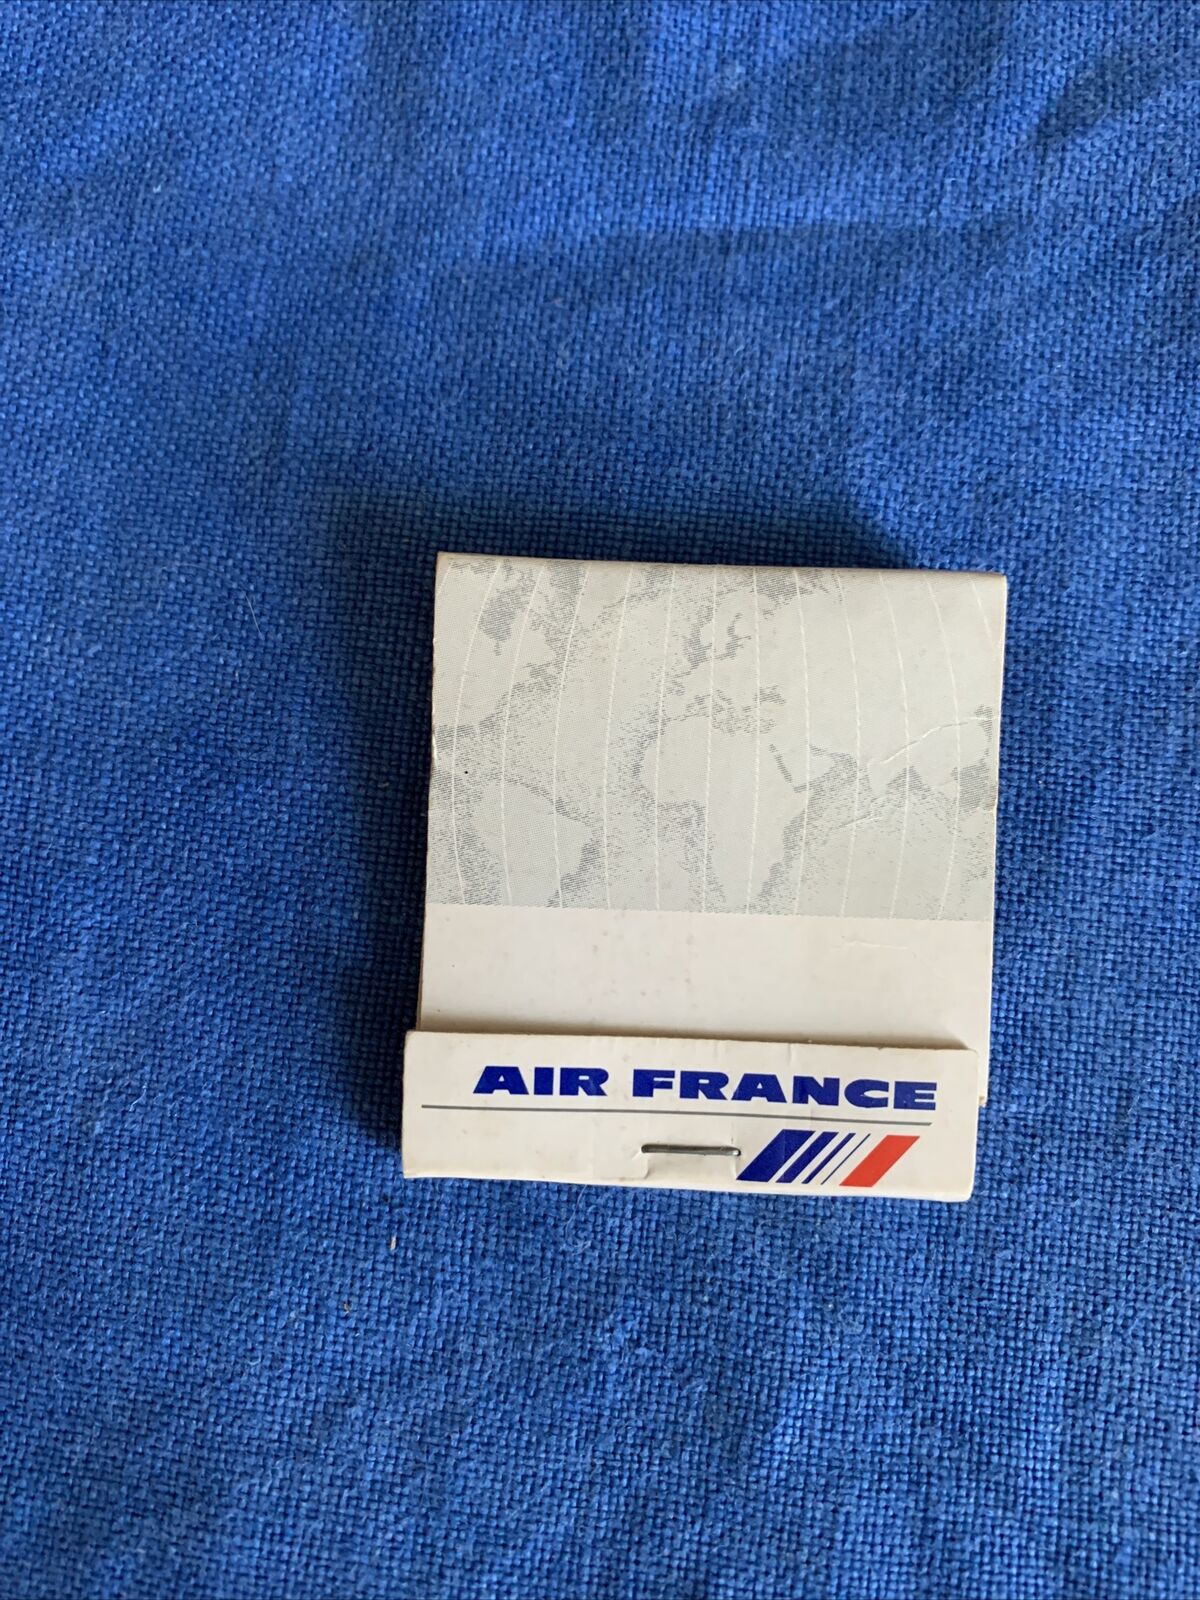 Air France Airline Matchbook Cover